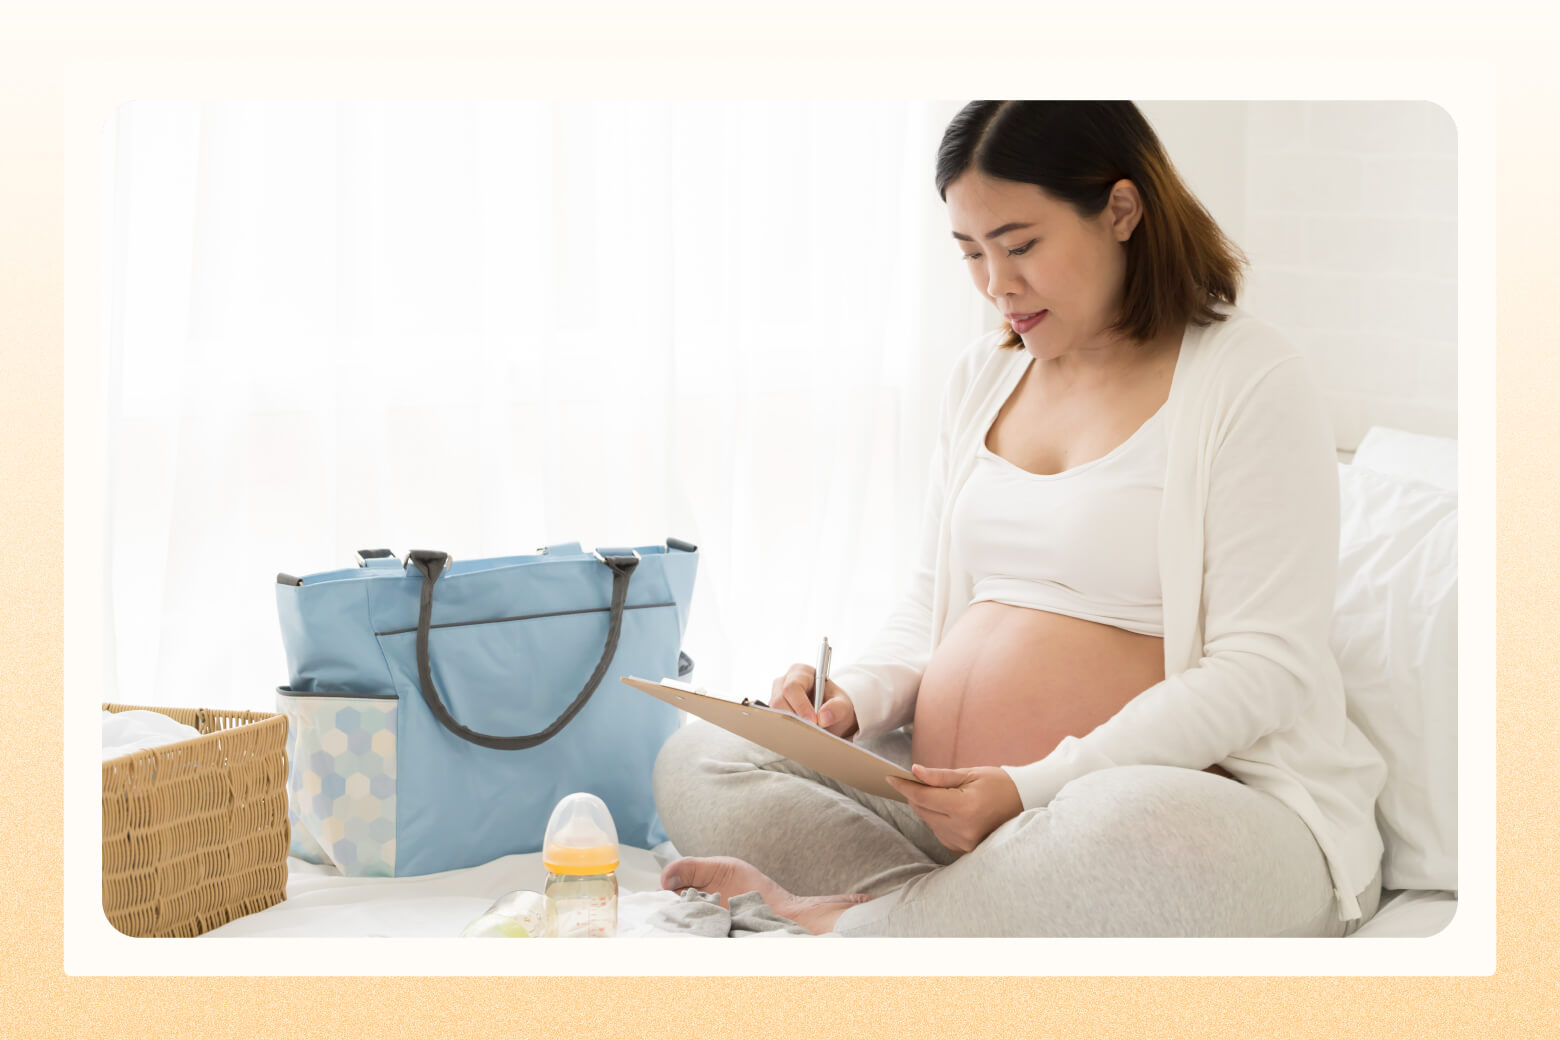 Pregnant mom working on a checklist next to a diaper bag and baby bottle